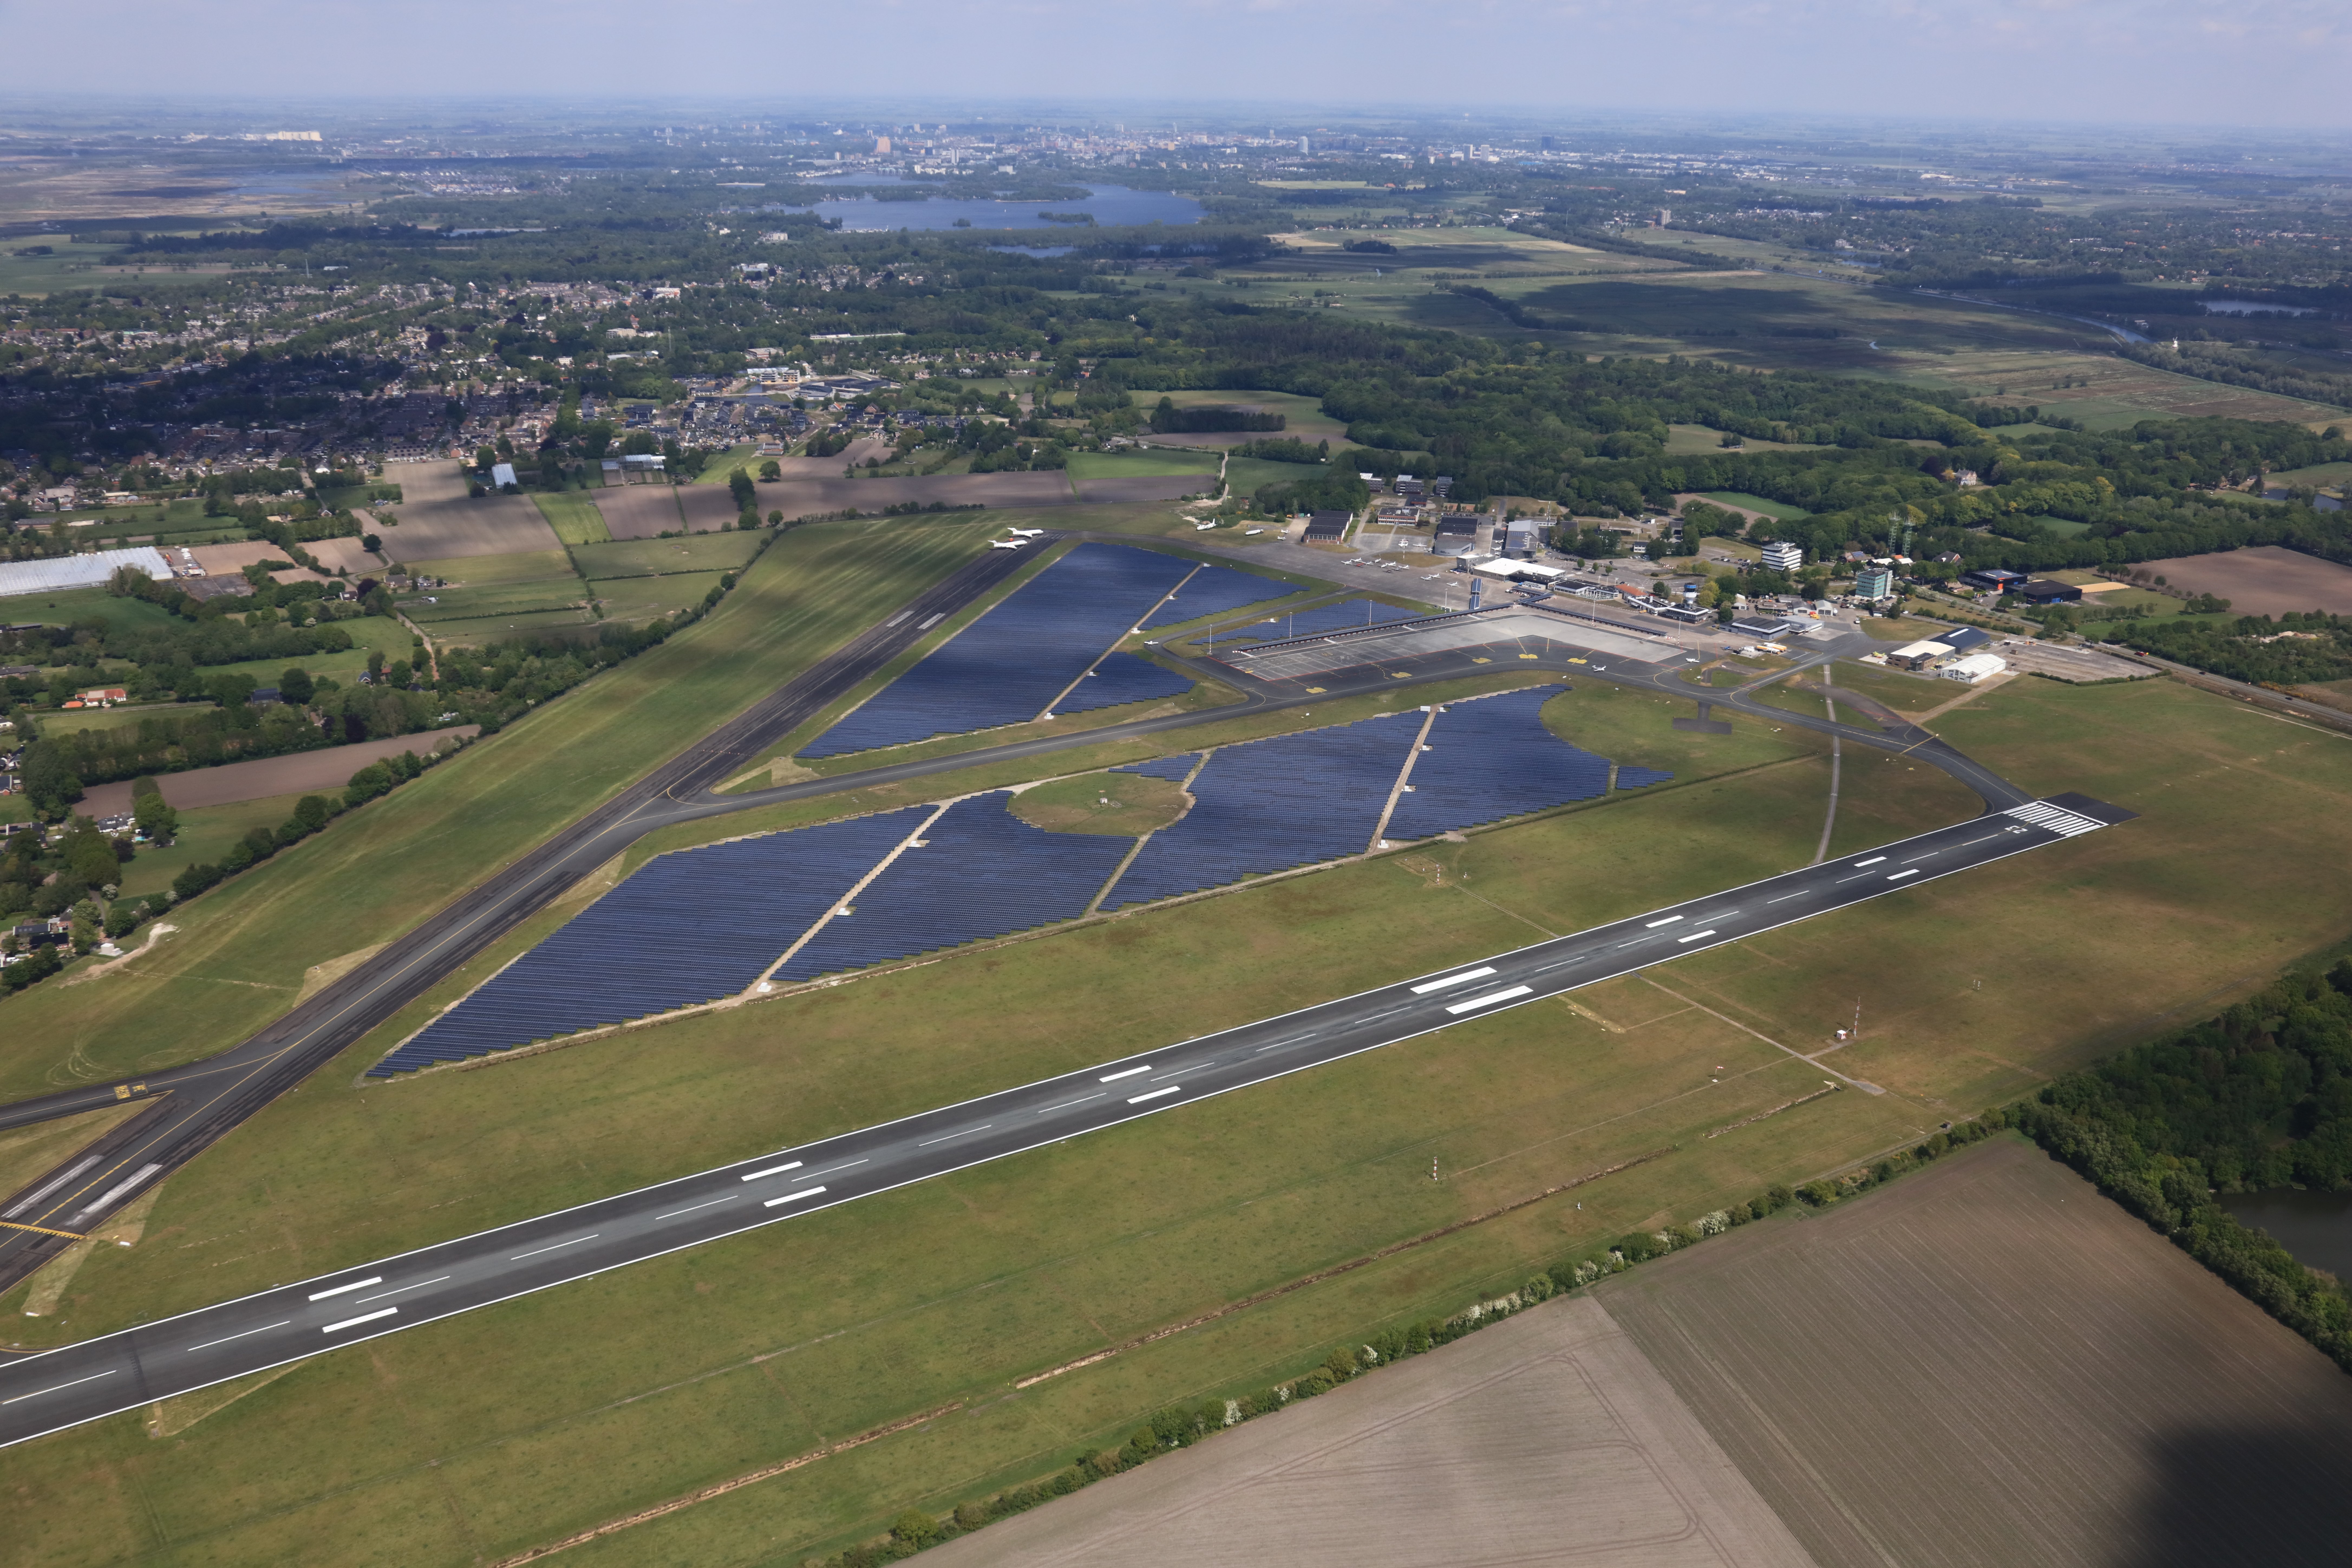 Electrolyzer at Dutch Eelde Airport will produce green hydrogen for large-scale use